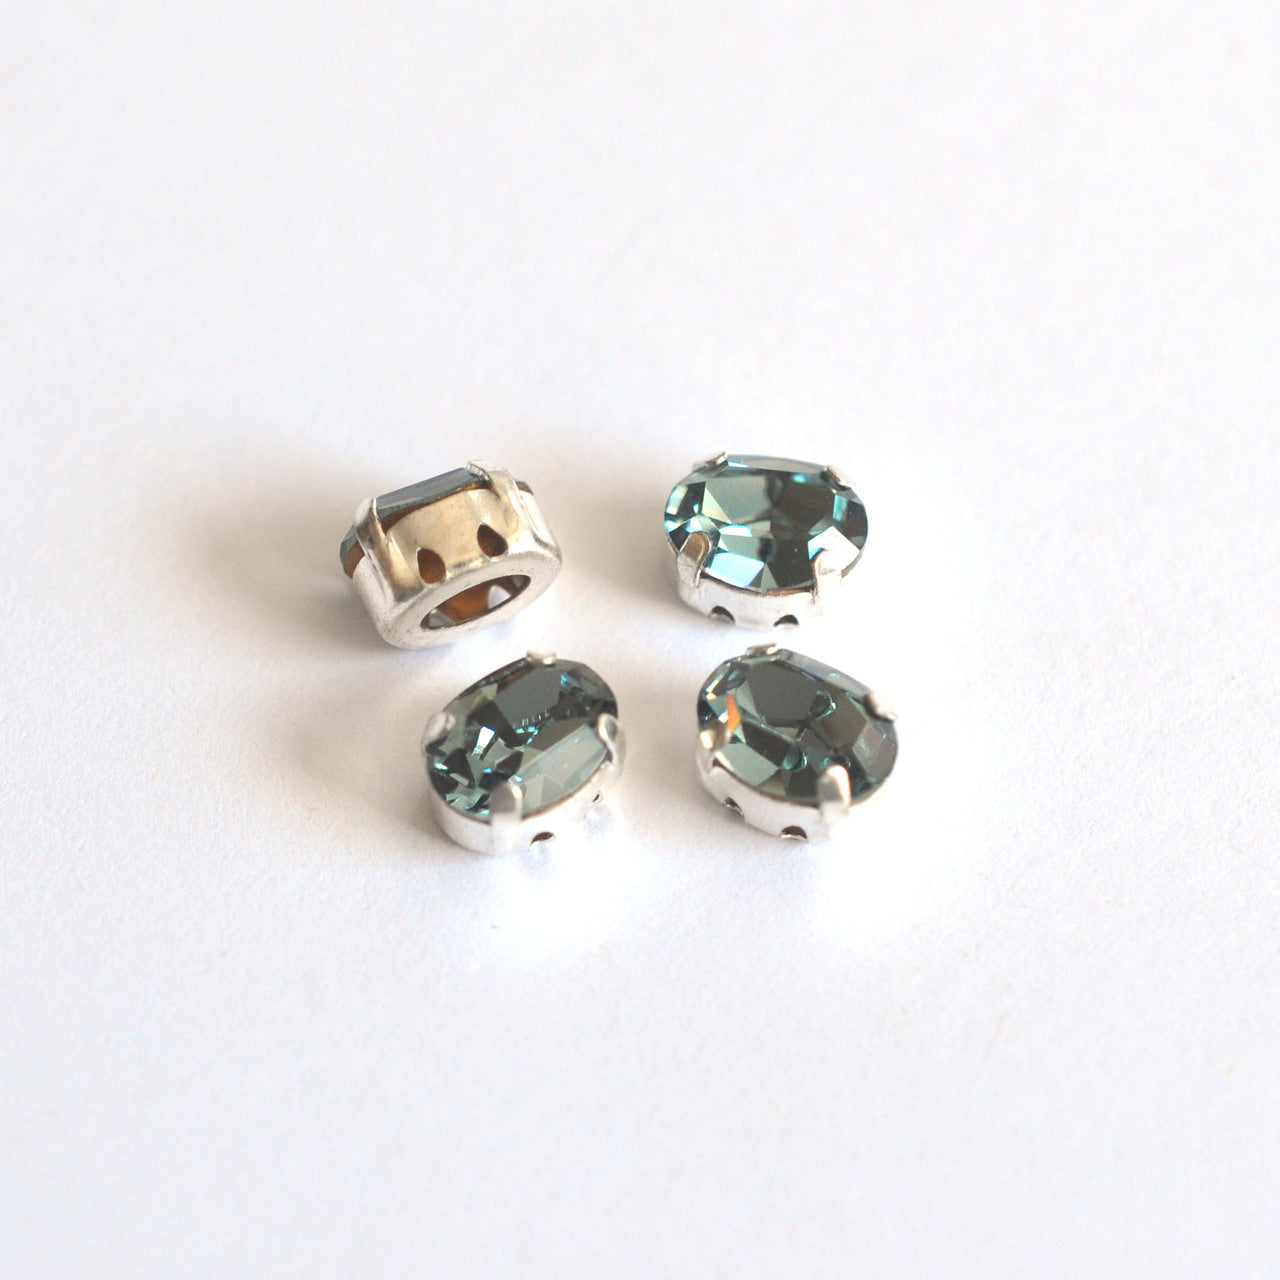 Indian Sapphire 8x6mm Sew On Set Ovals - 4 Pieces